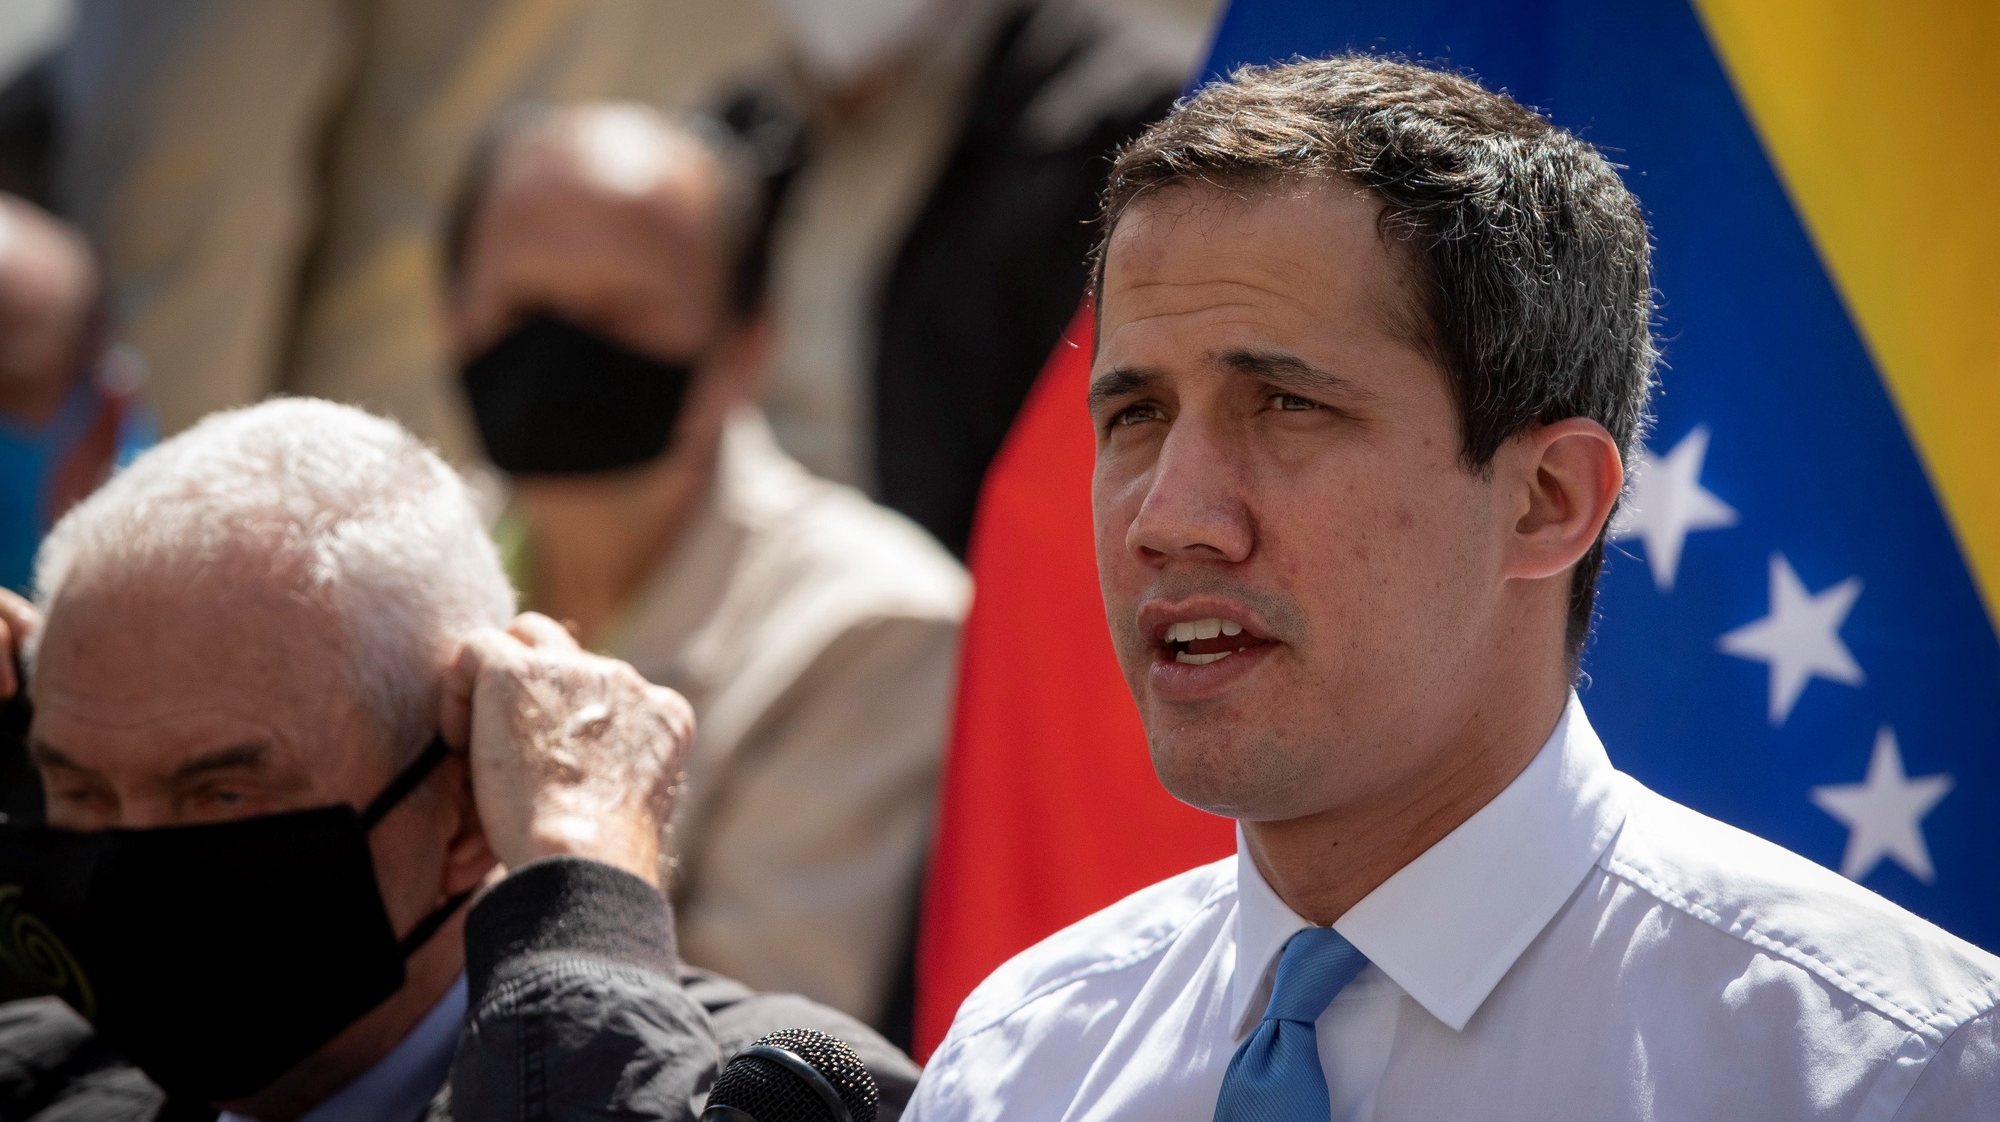 epa08985494 Venezuelan opposition leader Juan Guaido speaks during a press conference in Caracas, Venezuela, 03 February 2021. Guaido said that he is willing to seek resources for Venezuela to enter the COVAX vaccination program against covid-19, but indicated that its implementation depends on the Government of Nicolas Maduro accepting the scheme of the Pan American Health Organization (PAHO). On 20 January 2021, the lawyers of the board of the Central Bank of Venezuela (BCV) appointed by Maduro denounced that Guaido&#039;s team prevented access to funds in London that would allow participation in the Covax Mechanism.  EPA/RAYNER PENA R